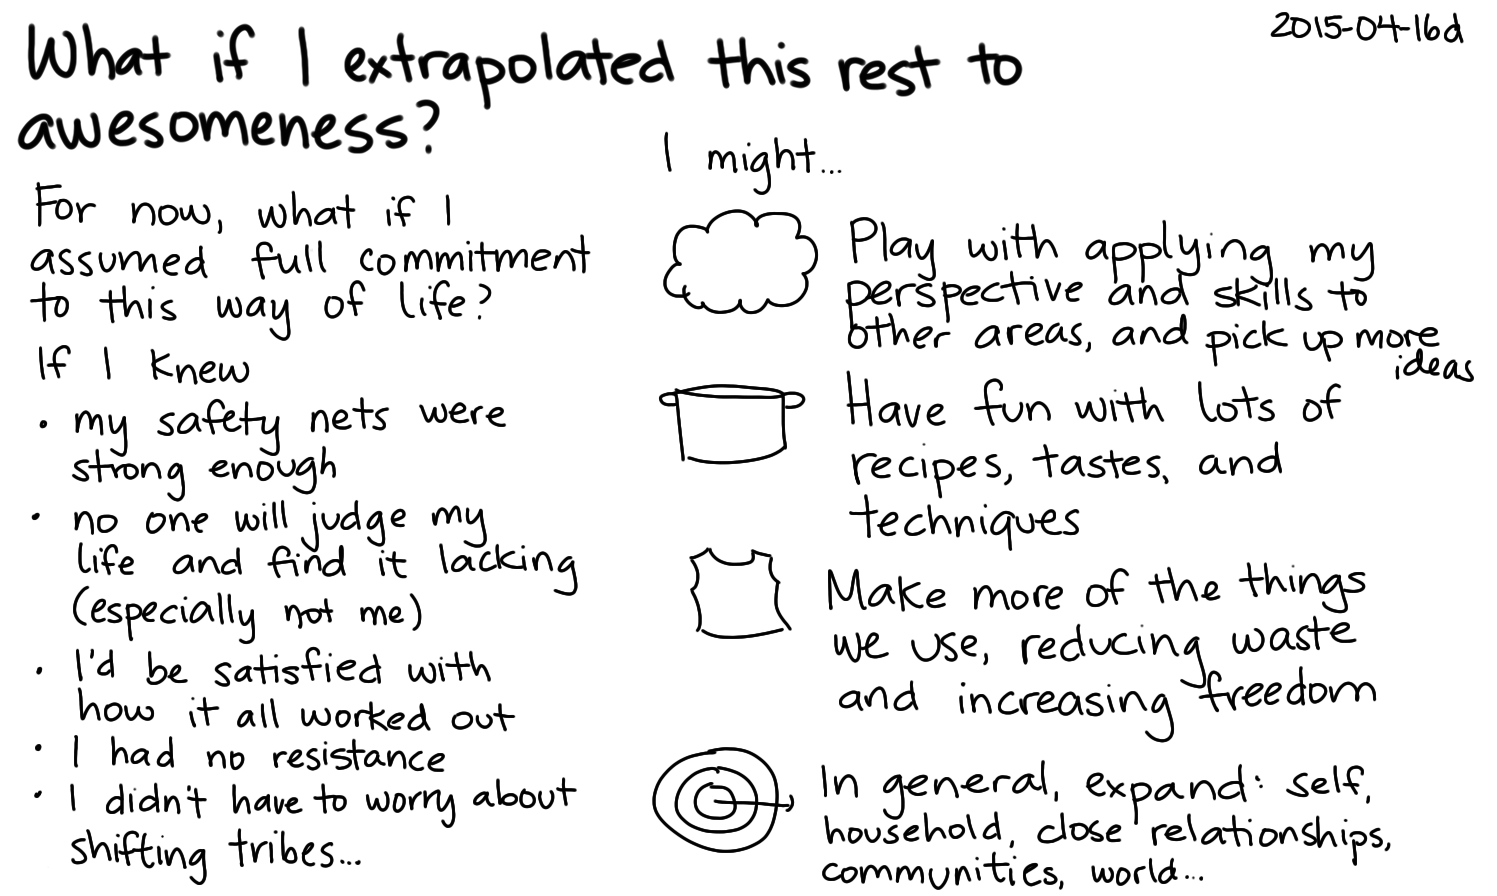 2015-04-16d What if I extrapolated this rest to awesomenss -- index card #life.png